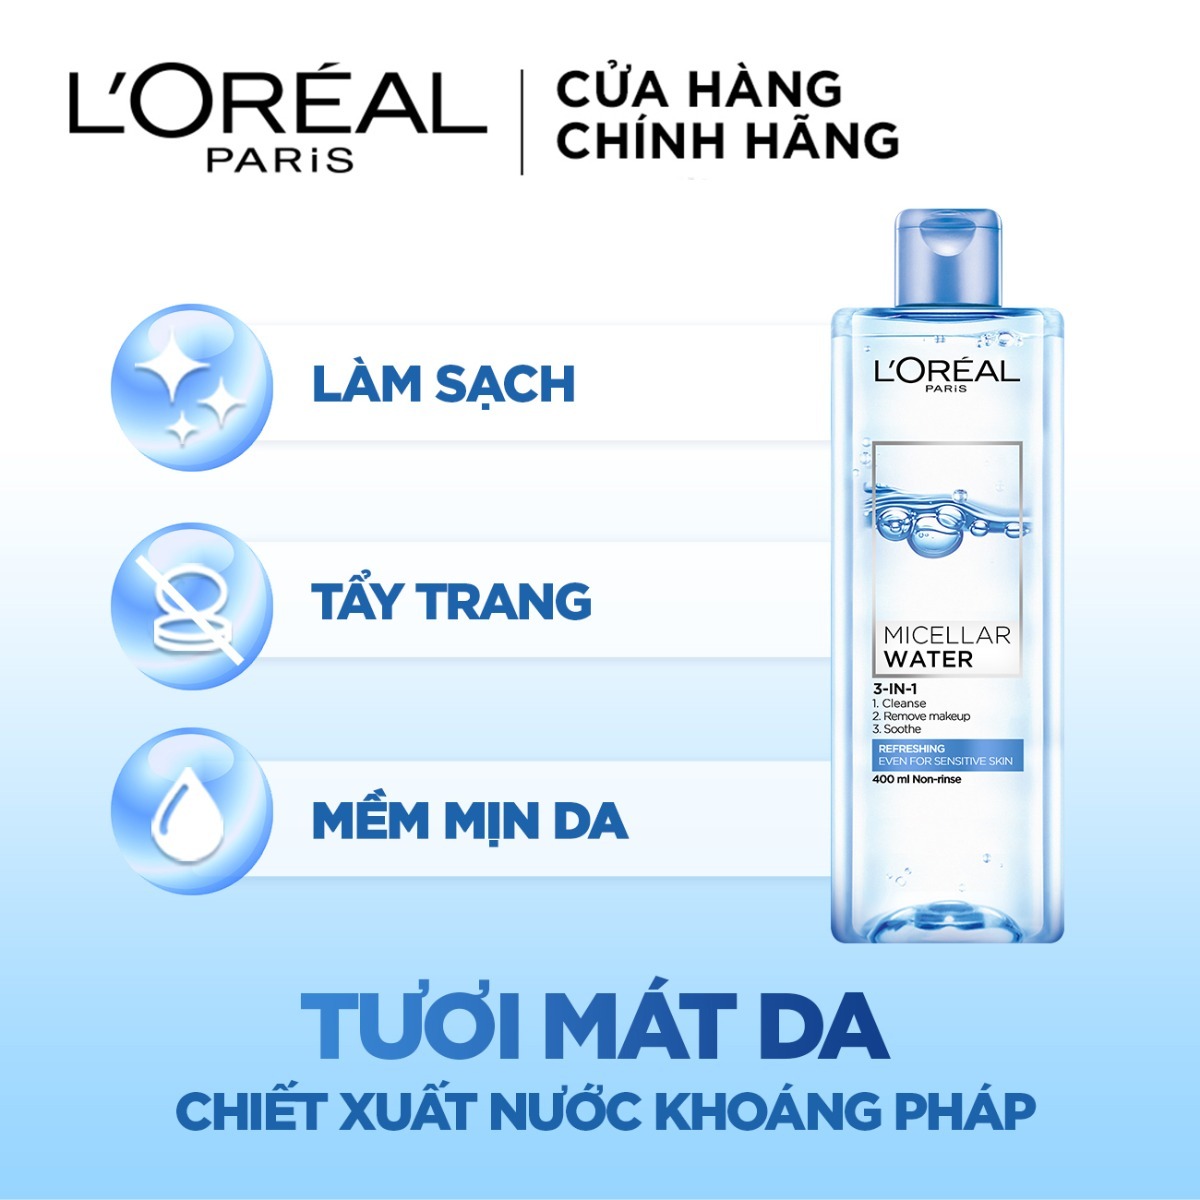 L'Oreal Micellar Water 3-in-1 Refreshing Even For Sensitive Skin